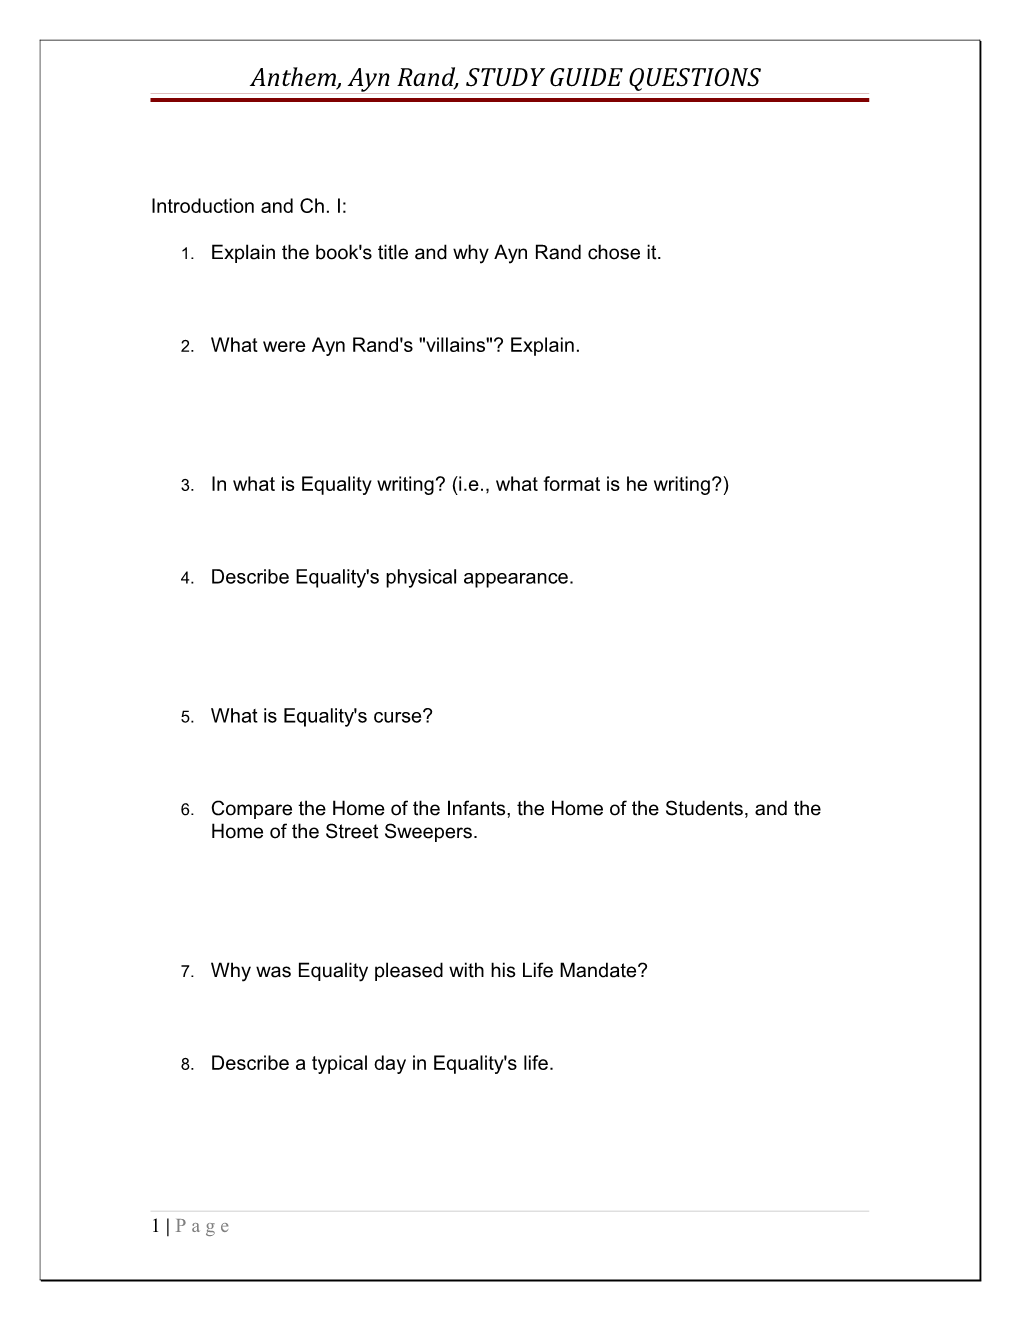 Anthem, Ayn Rand, STUDY GUIDE QUESTIONS